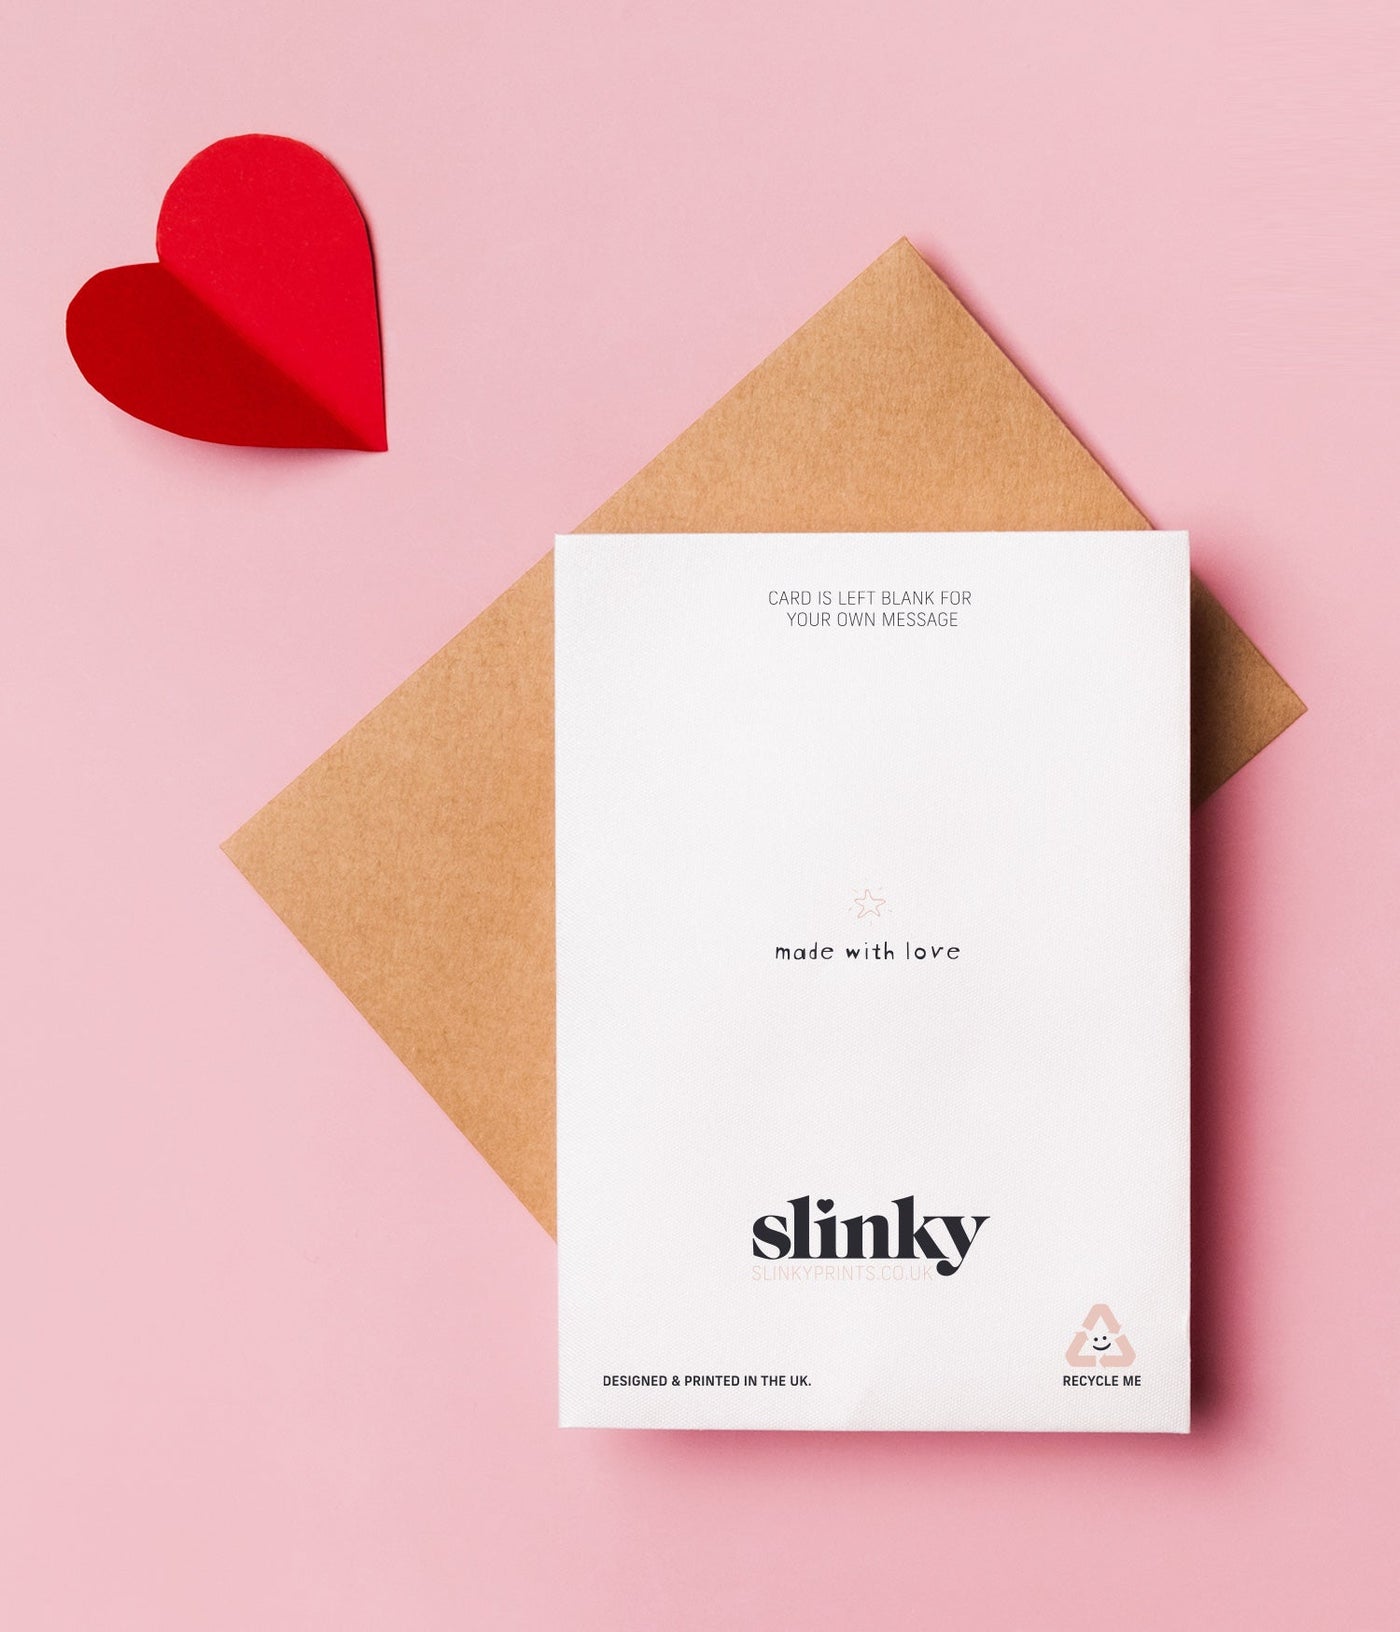 'I Think You Are Really Fit' Valentine's Card